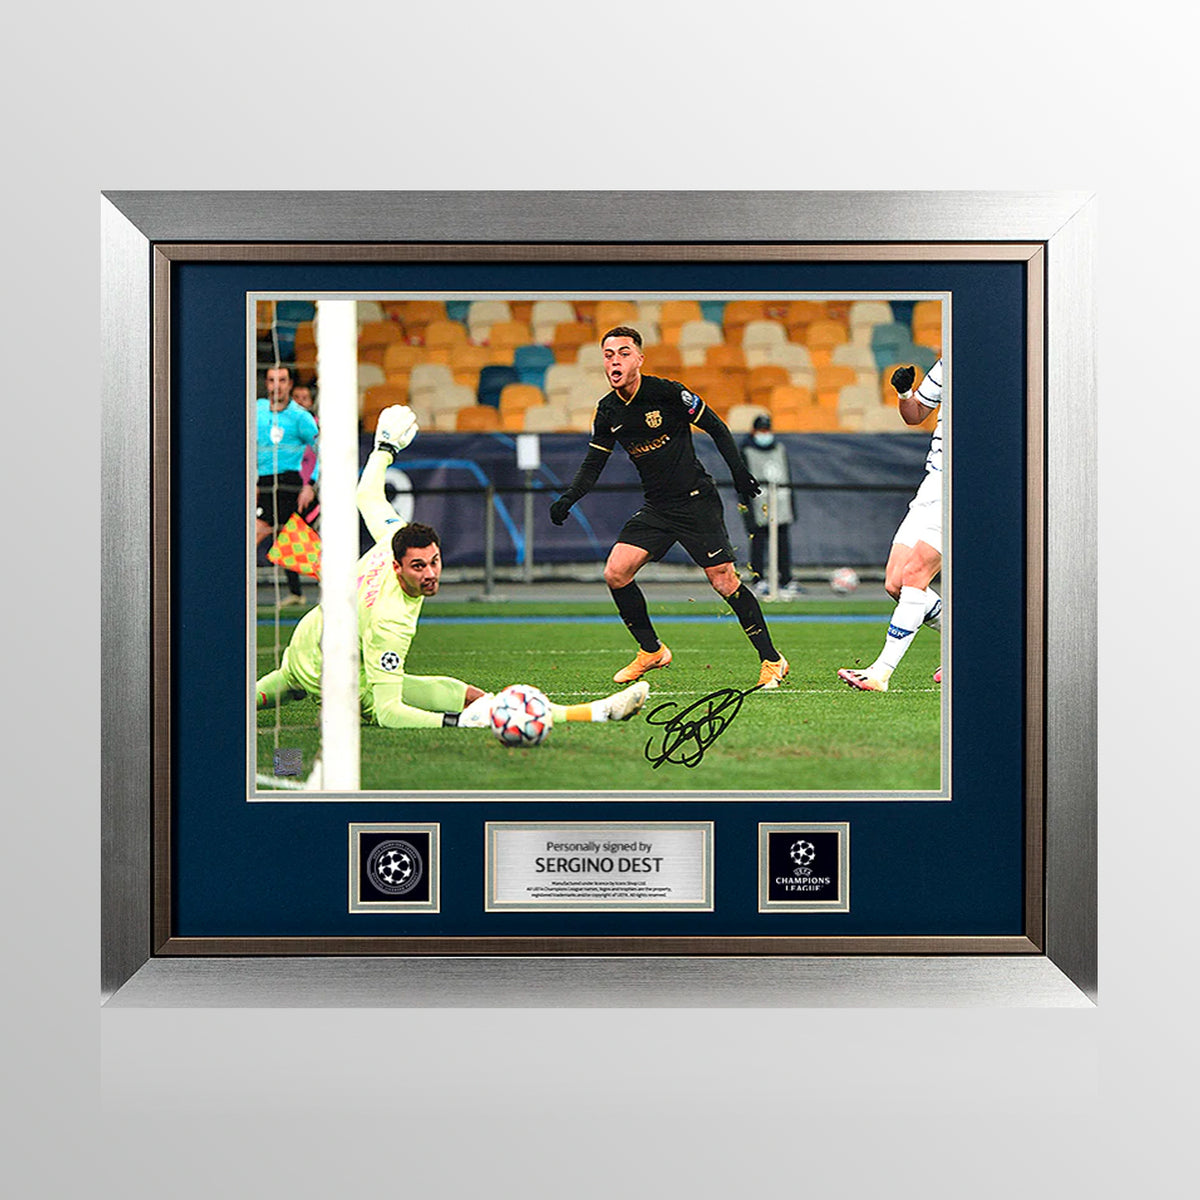 Sergino Dest Official UEFA Champions League Signed and Framed FC Barcelona Photo: Goal vs Dynamo Kiev UEFA Club Competitions Online Store